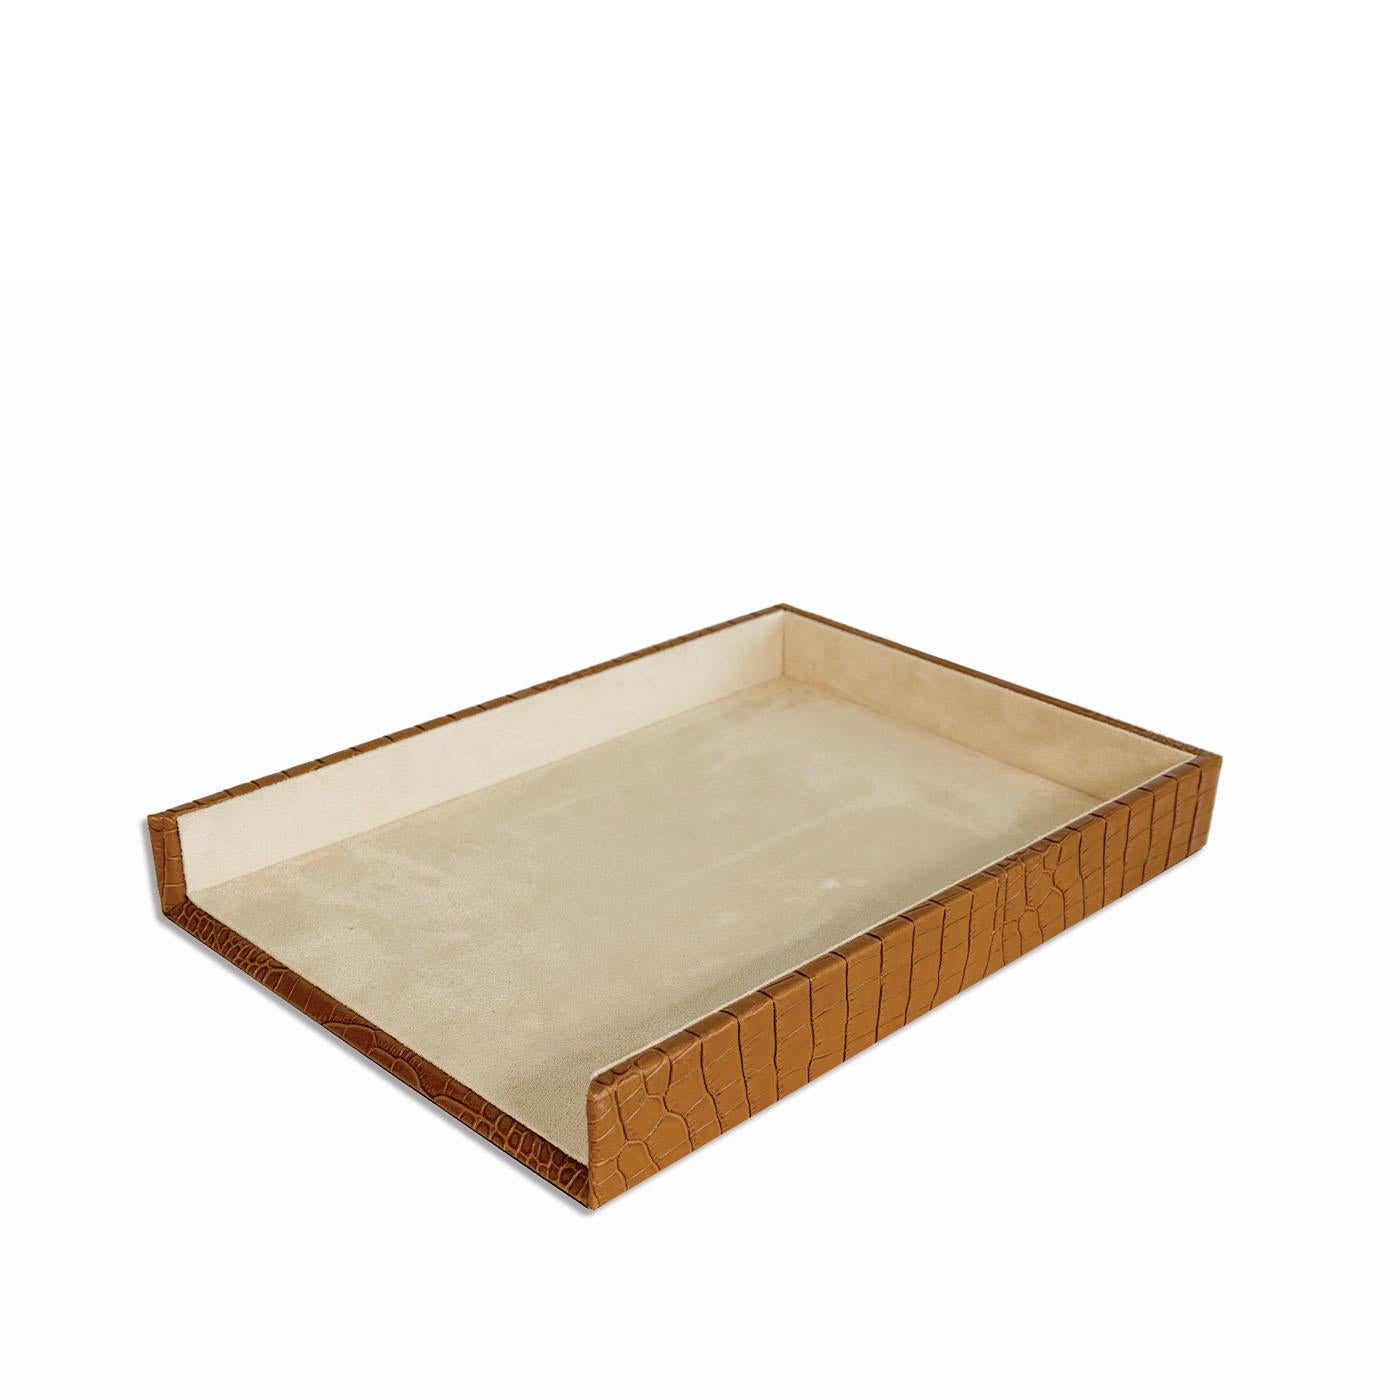 Handmade paper tray A4 dressed in fine and soft genuine grain leather and soft microfiber. Available in two colors.